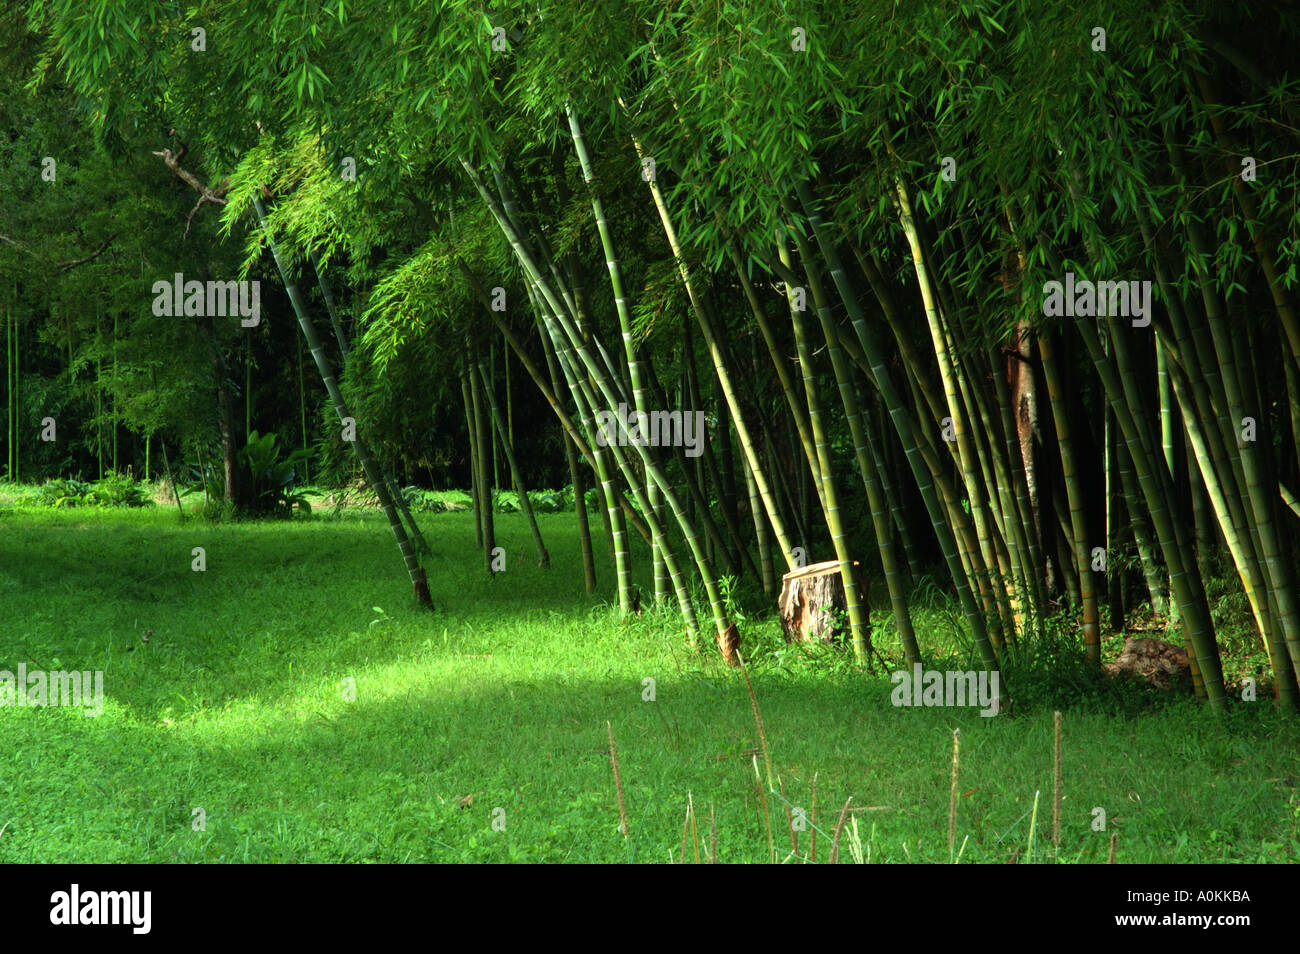 Moso Bamboo Scientific name Phyllostachys Pubescens growing in Queensland Australia dsc 9060 Stock Photo